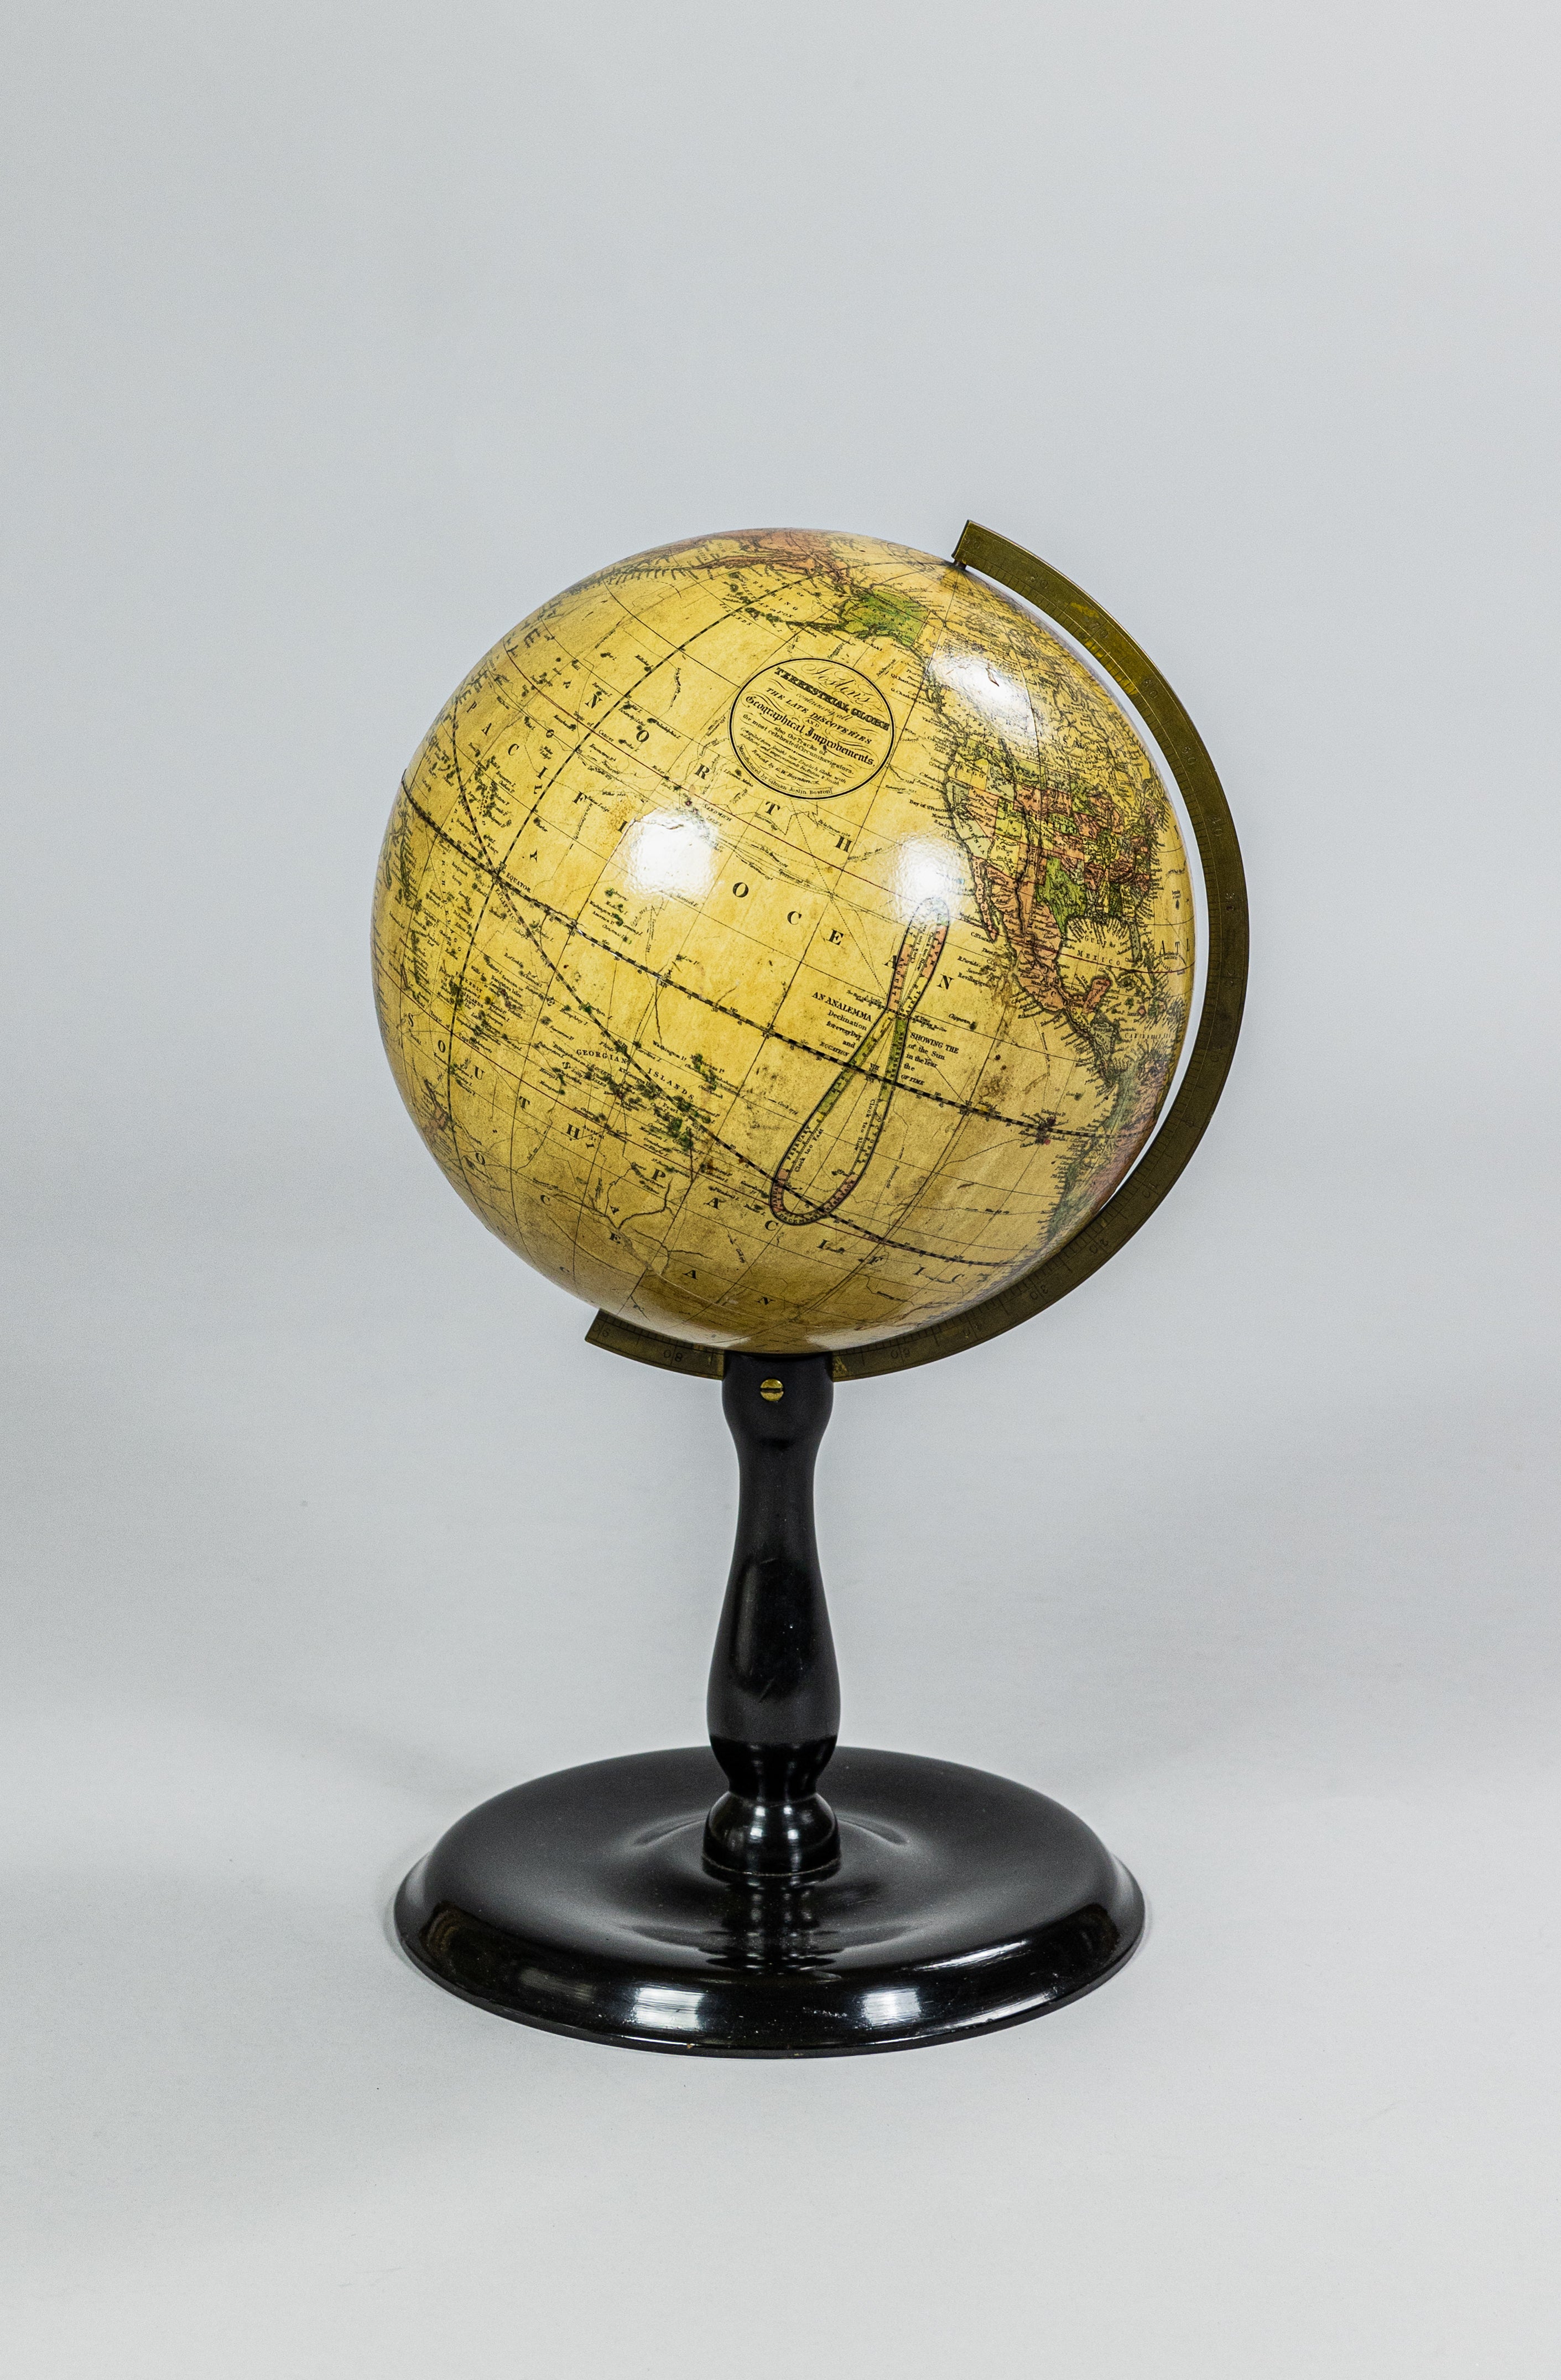 Gilman JOSLIN (1804 – 1886) Joslin’s Terrestrial Globe compiled from  Smith’s New English Globe with improvements by Annin and Smith, revised by  